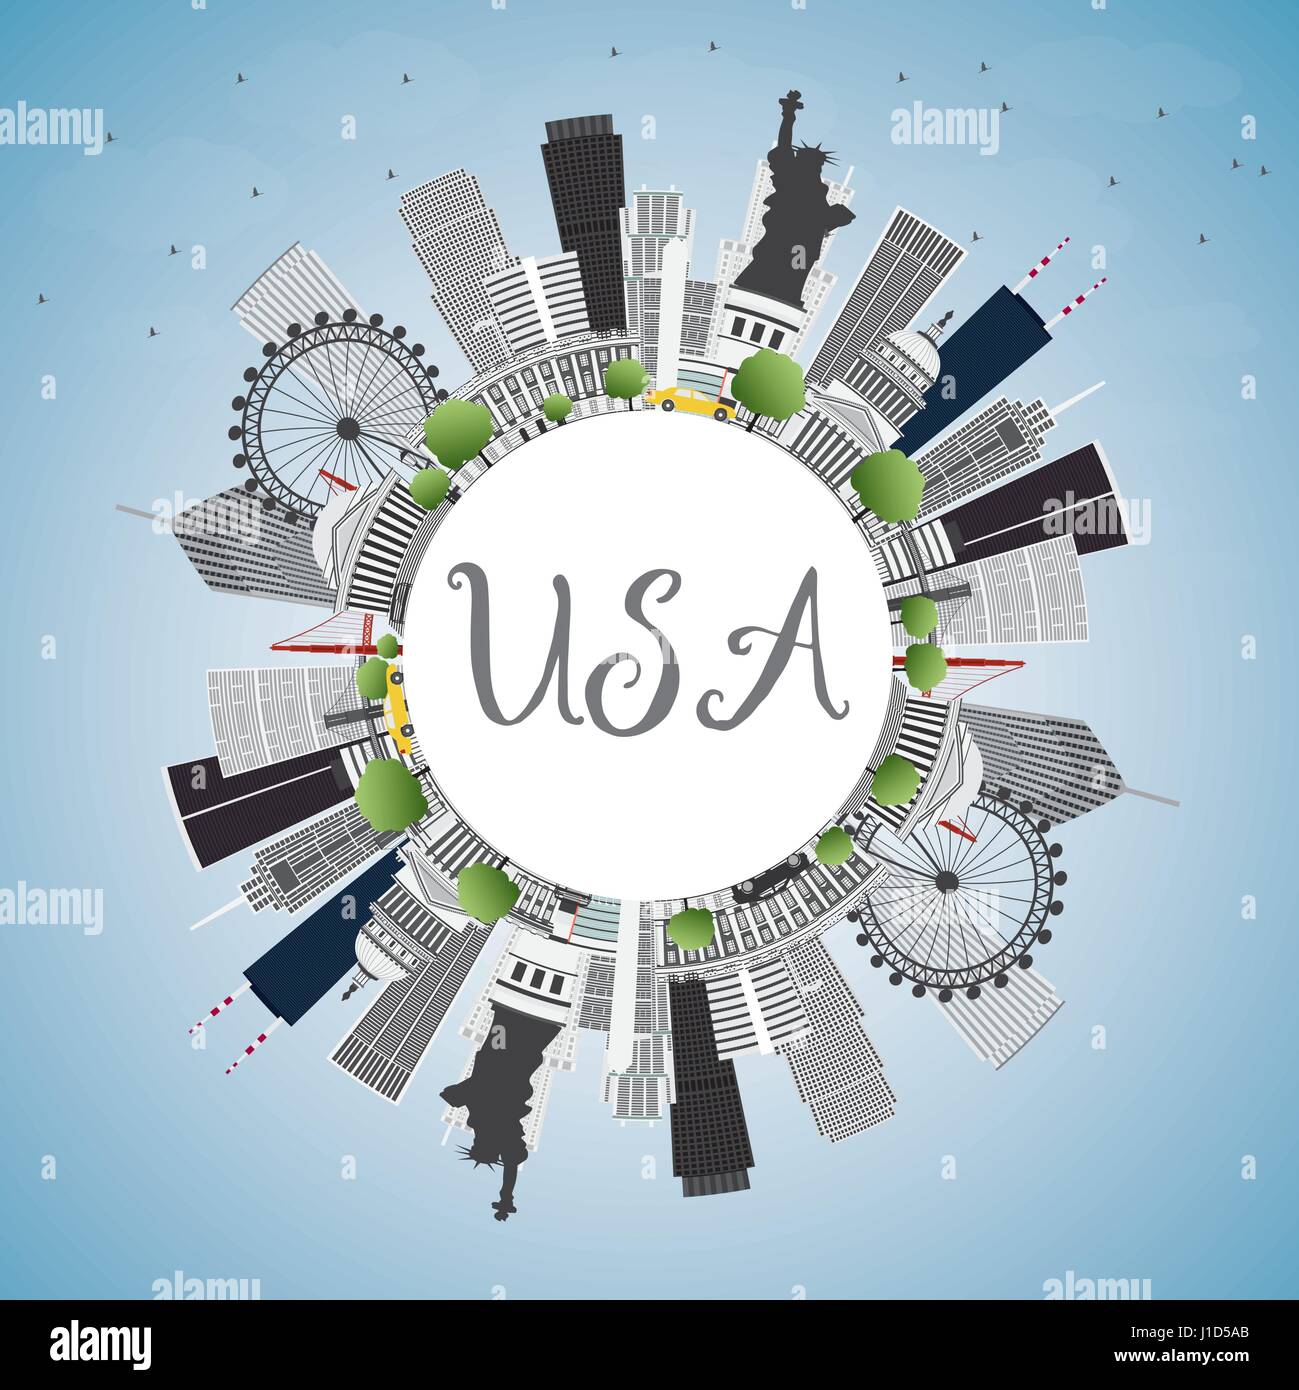 USA Skyline with Gray Skyscrapers, Landmarks and Copy Space. Vector Illustration. Business Travel and Tourism Concept with Modern Architecture. Stock Vector